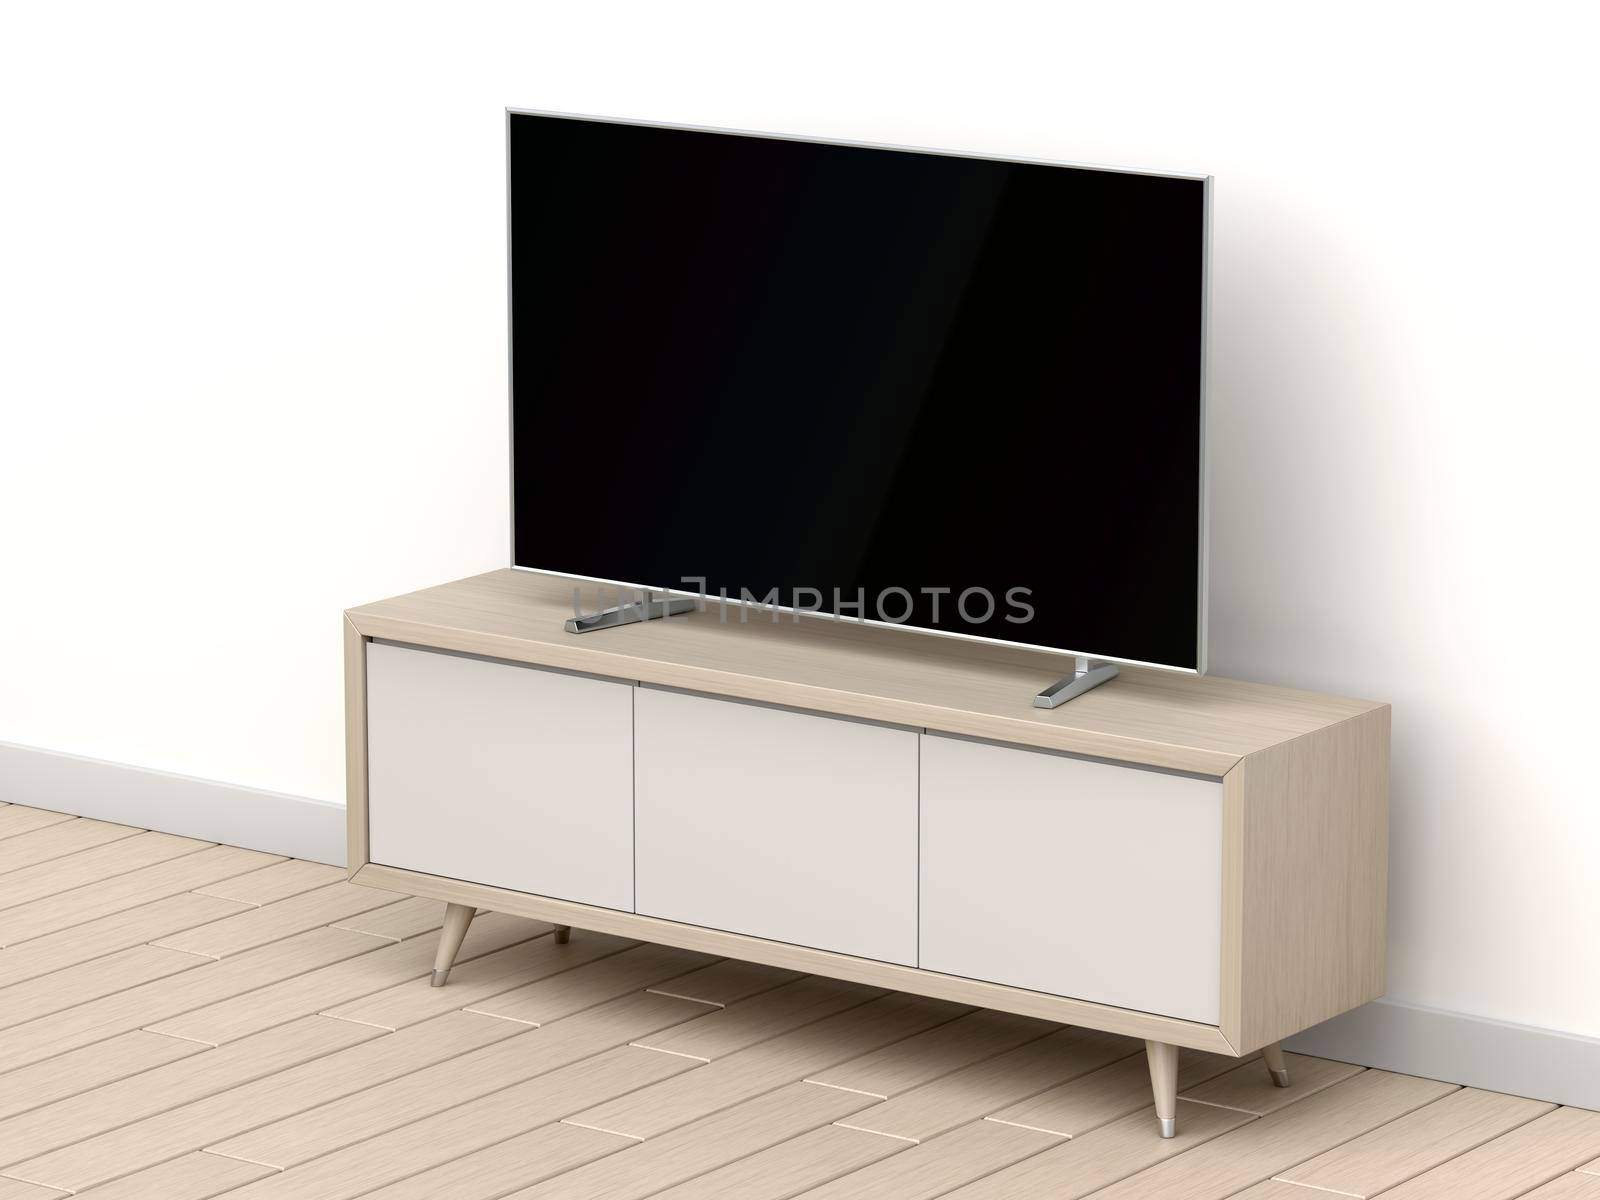 Big tv on modern tv stand by magraphics